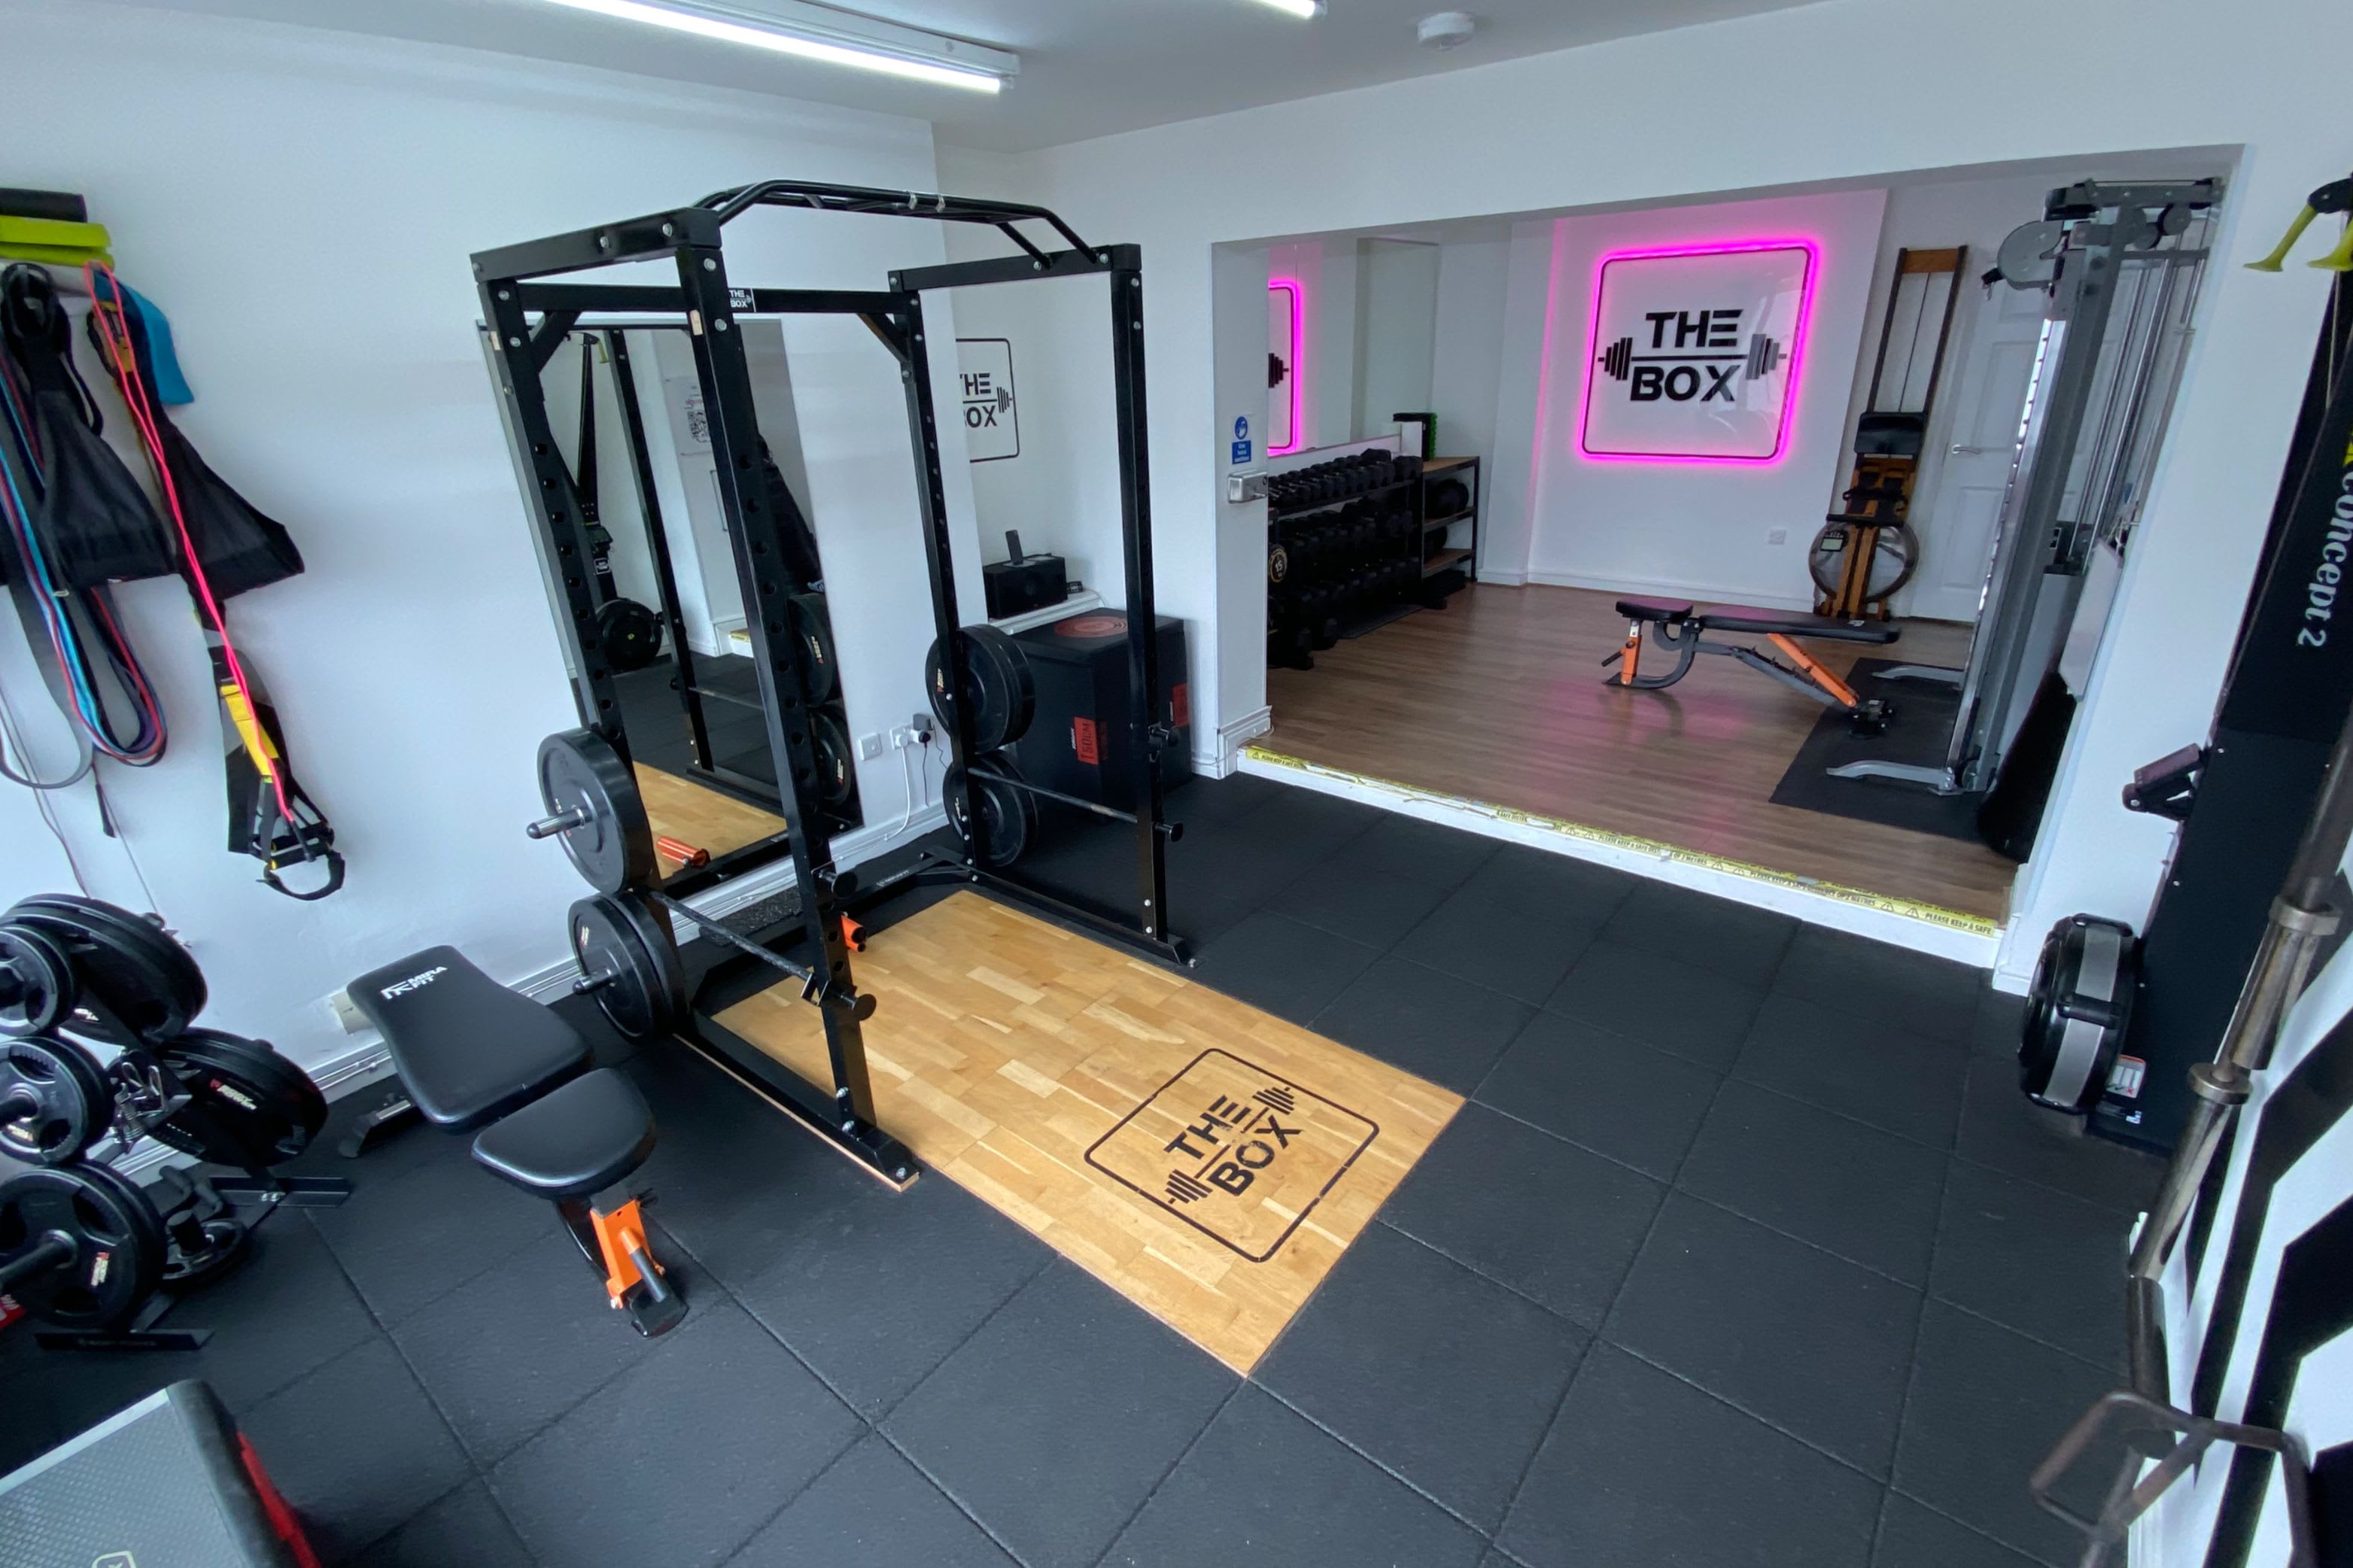 The Box Personal Training Studio: Read Reviews and Book Classes on